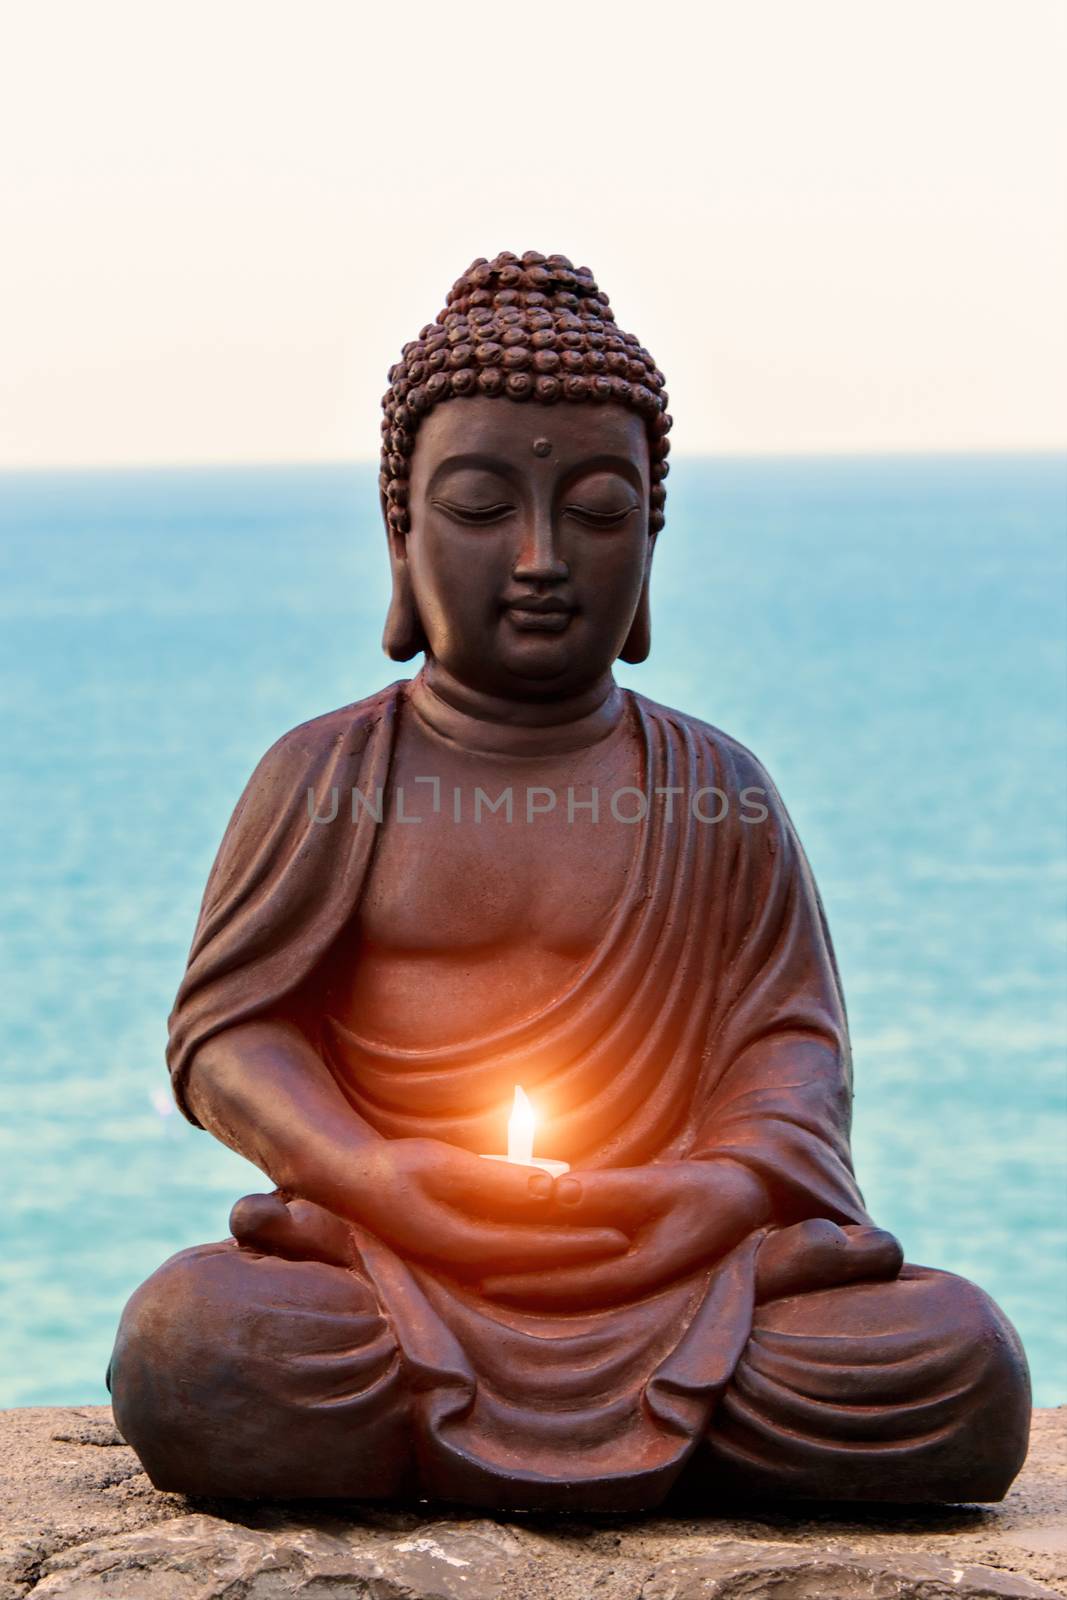 Buddha with a candle in hands and sea background. Vertical image.